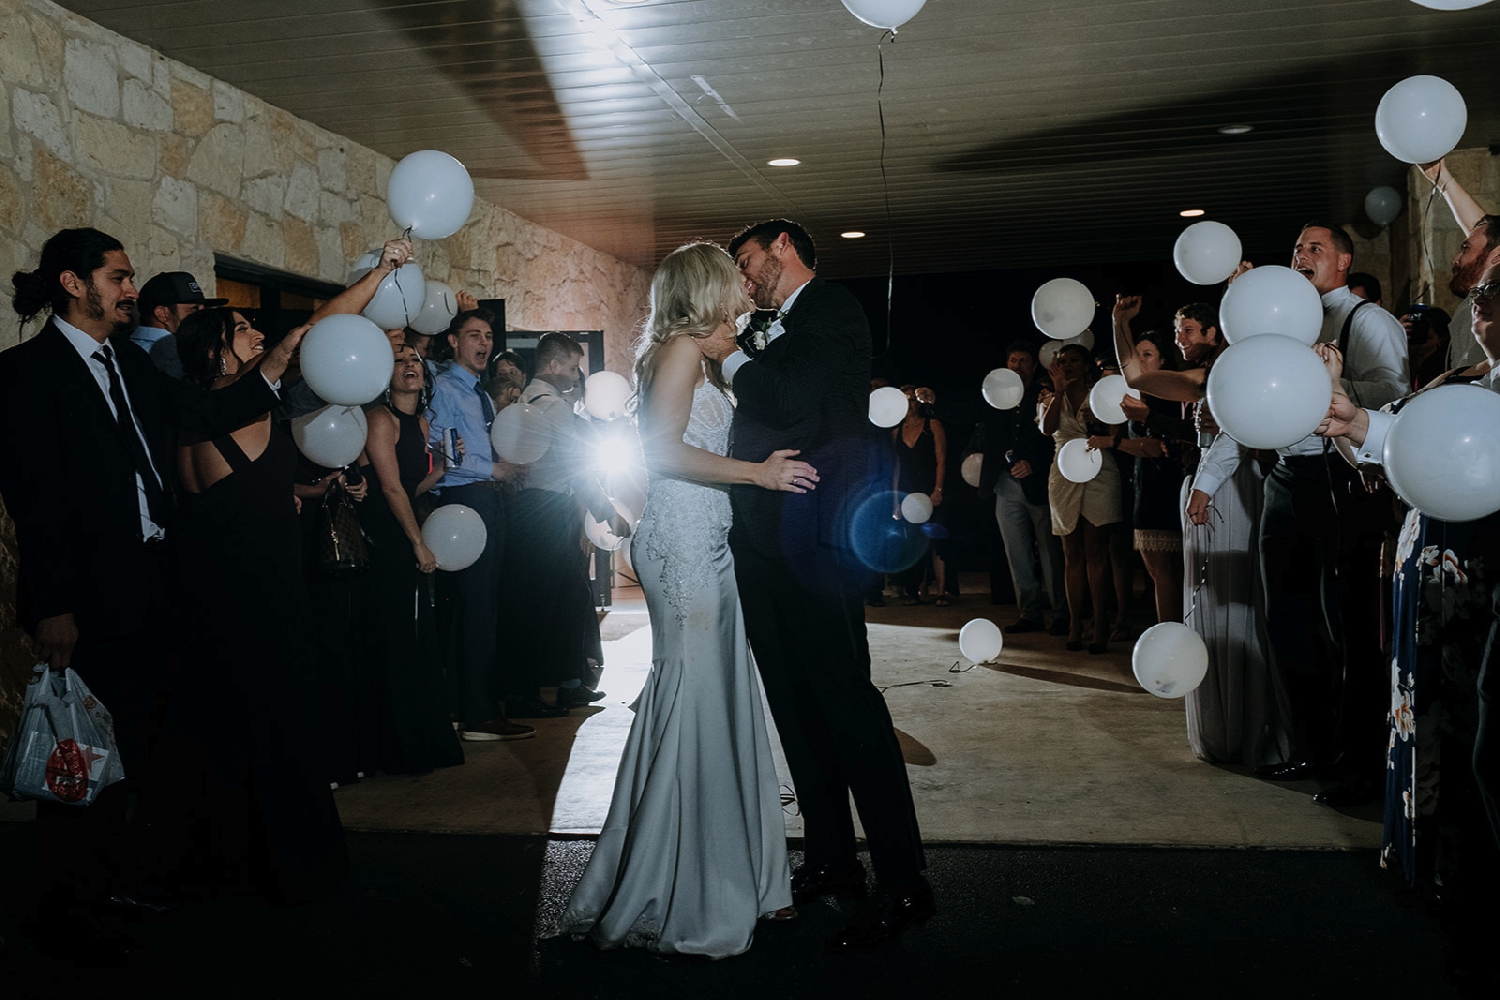 Balloon Exit on Wedding Day | Classic Black and White Wedding Inspiration | Church Hall Transformation for Wedding in San Antonio, Texas | Central Texas Floral Designer | Reiley and Rose